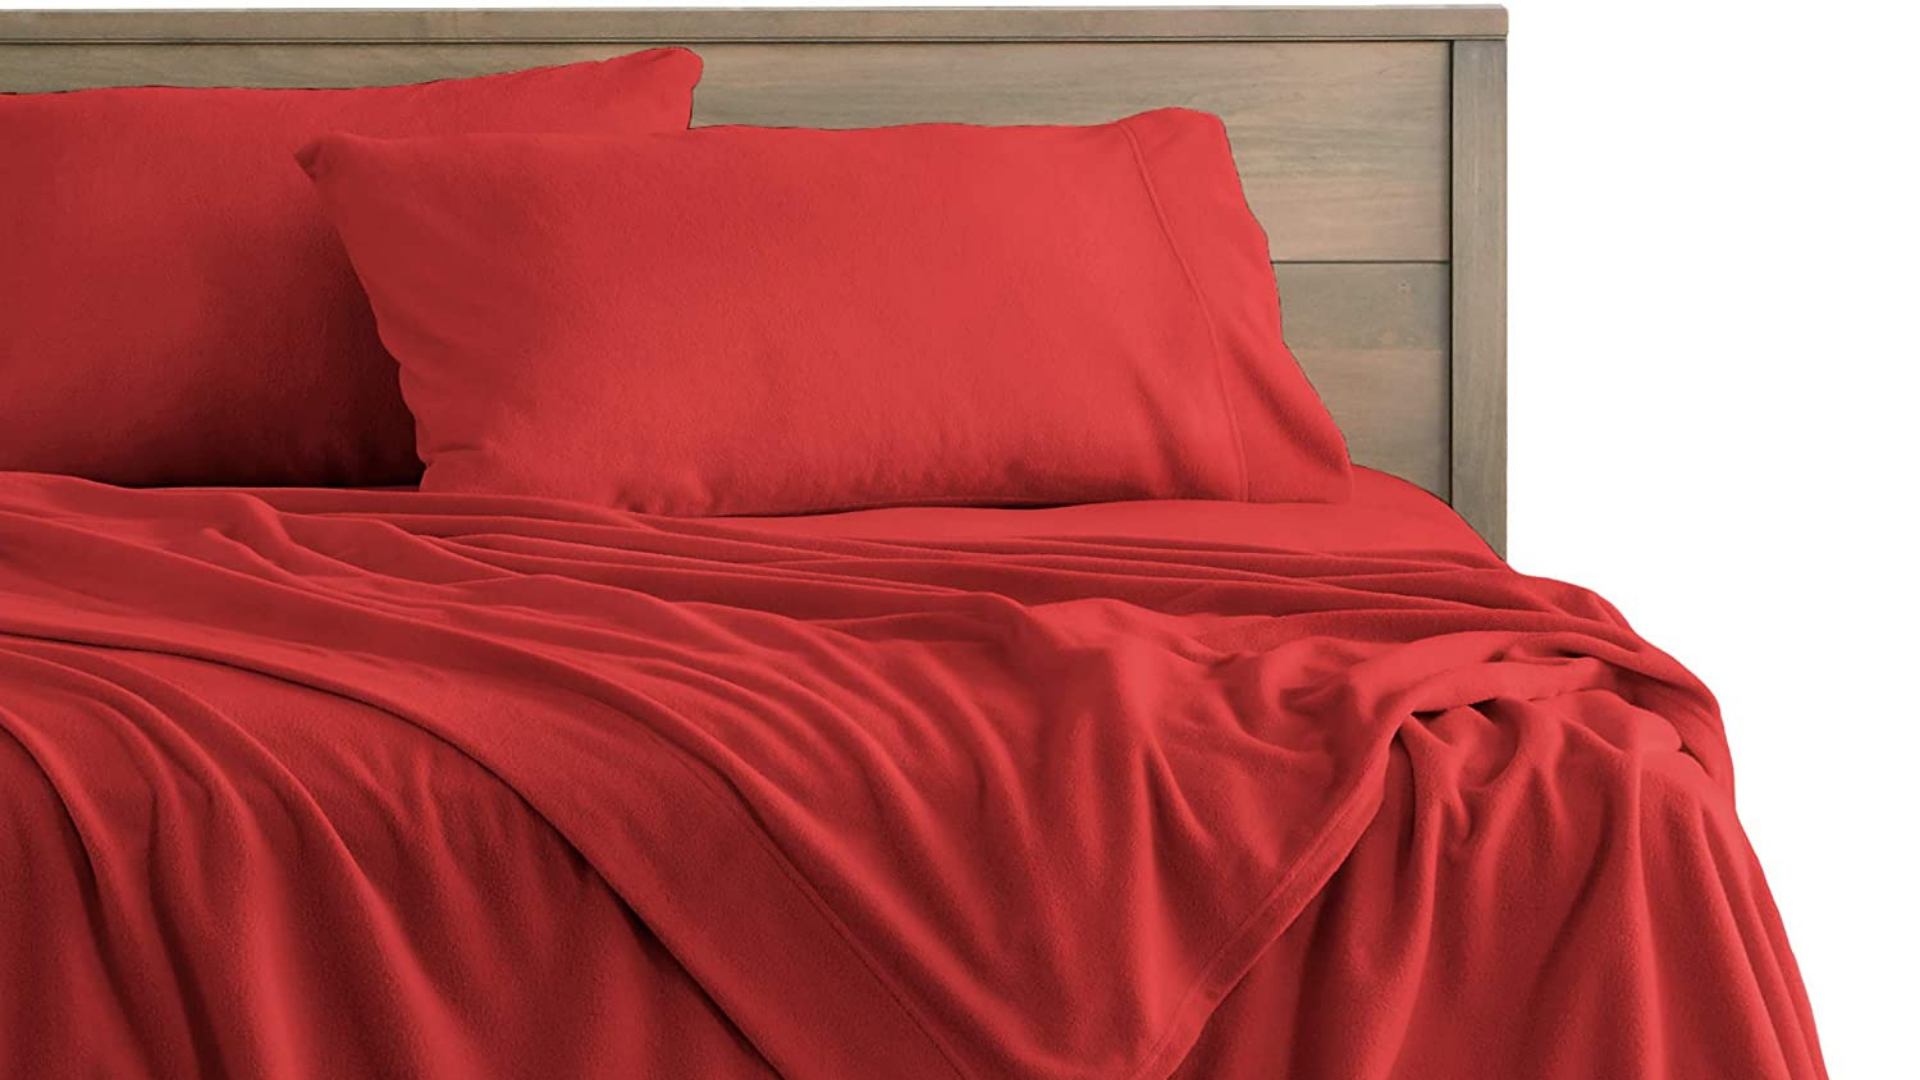 Best Sheets for Winter That Will Give You the Coziest Sleep of Your Life